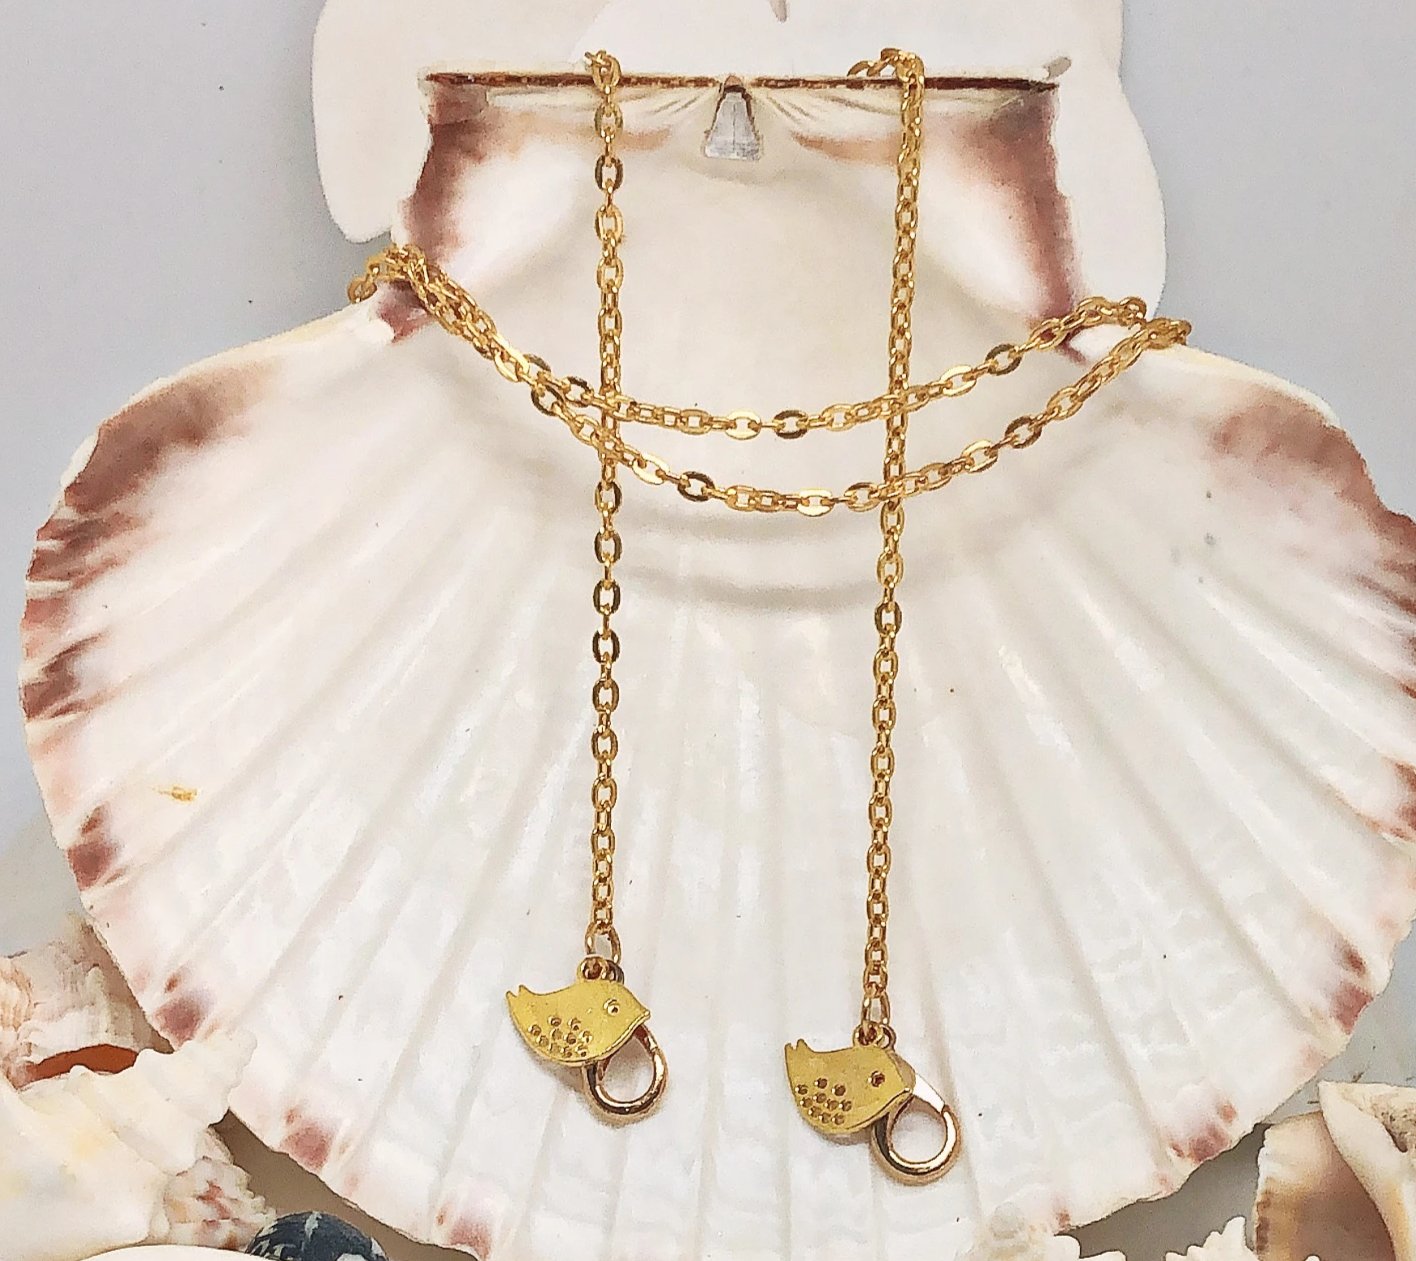 Gold Mask Chain with Bird Charms